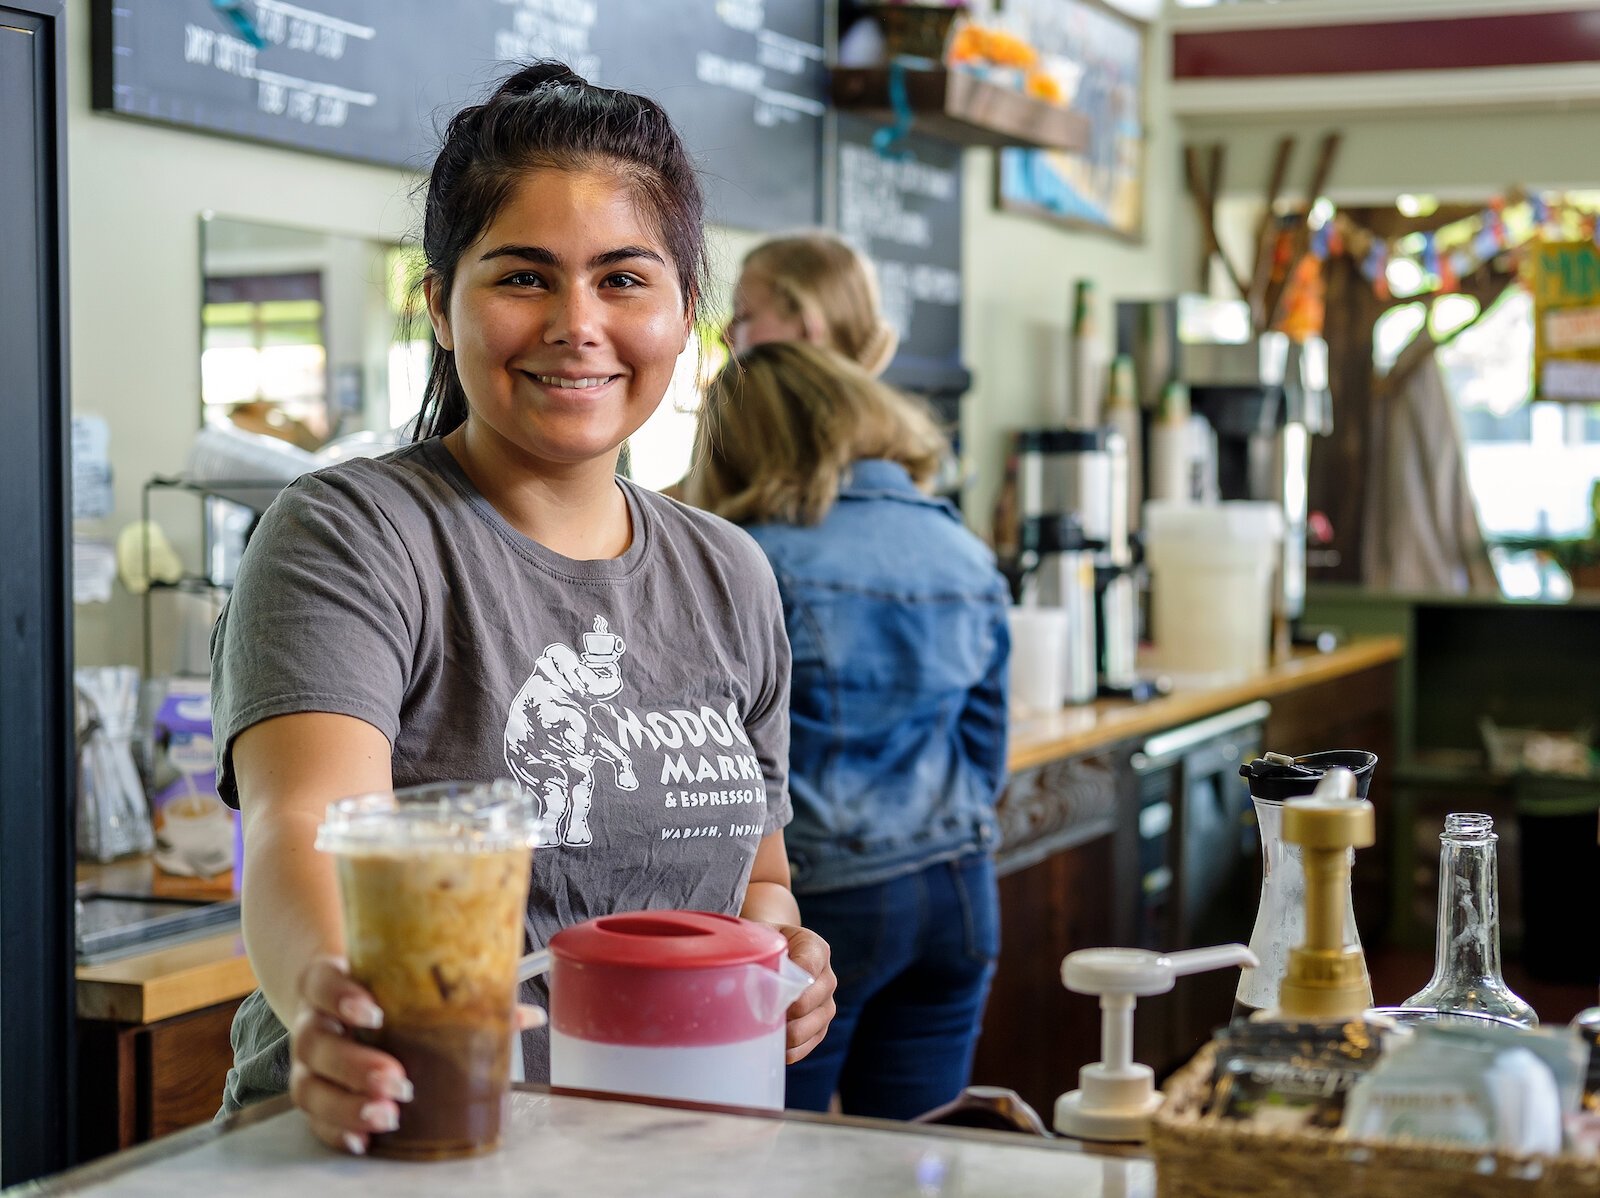 Barista Masyn Zapata serves a drink at Modoc's Market in Downtown Wabash.